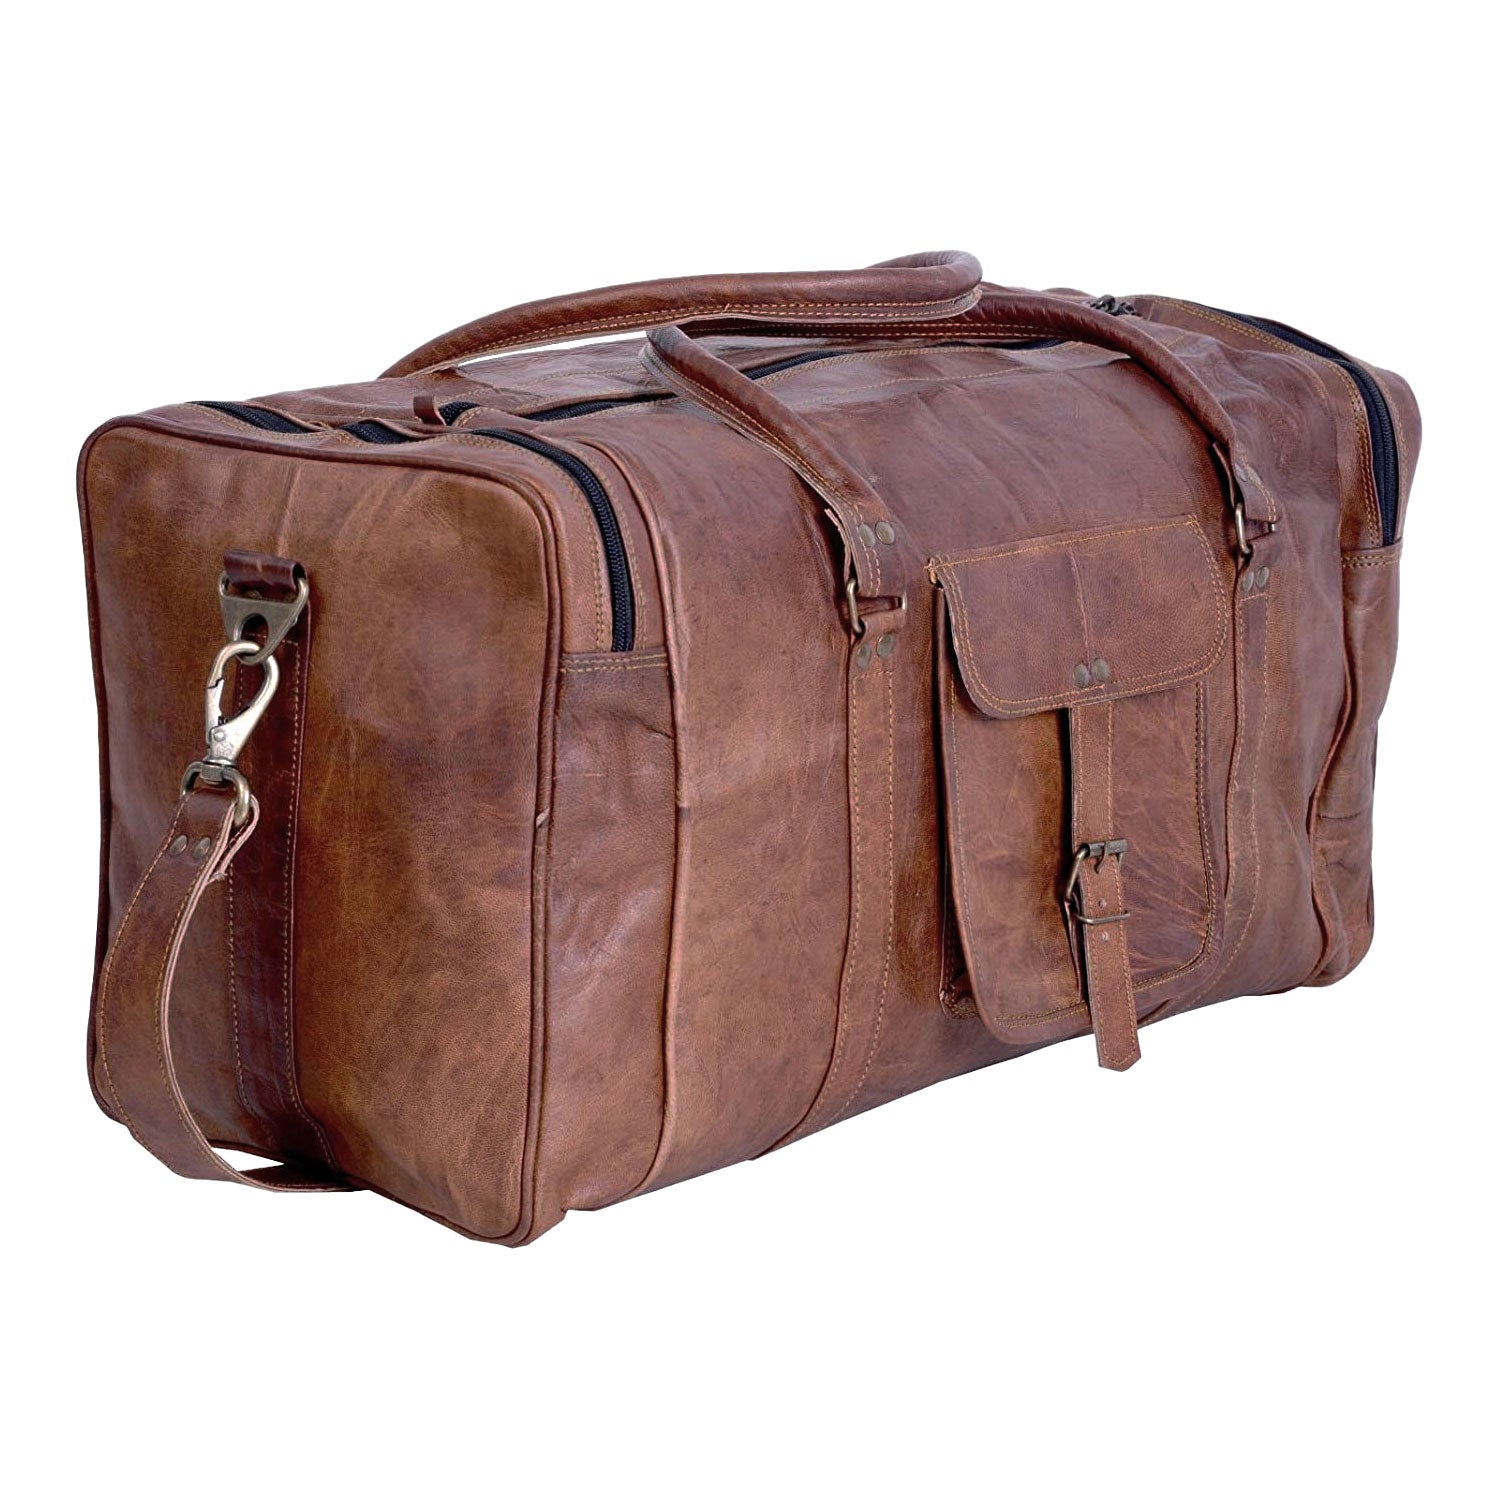 Classical Men Duffle Bag For Women Travel Bags Men Luggage Bag Men PVC  Leather Handbags Large Cross Body Totes264a From Psyyy, $39.05